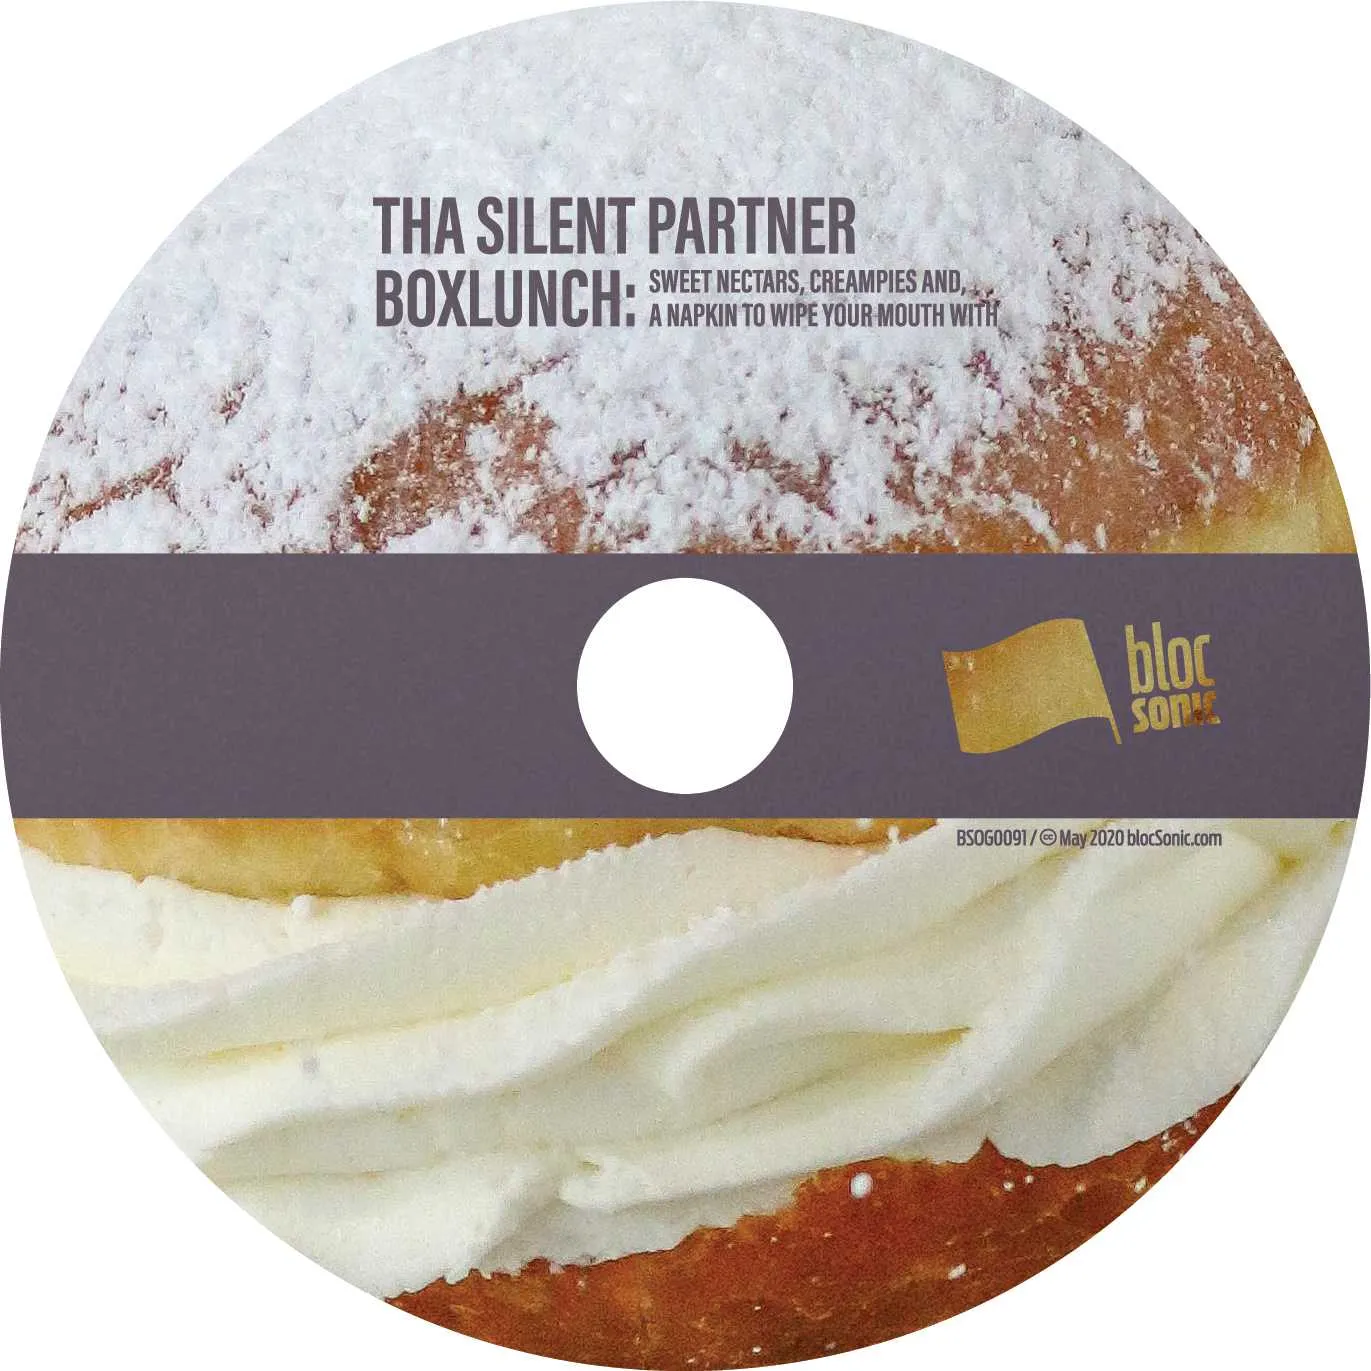 Album disc for “BOXLUNCH: Sweet Nectars, Creampies And, A Napkin To Wipe Your Mouth With” by Tha Silent Partner